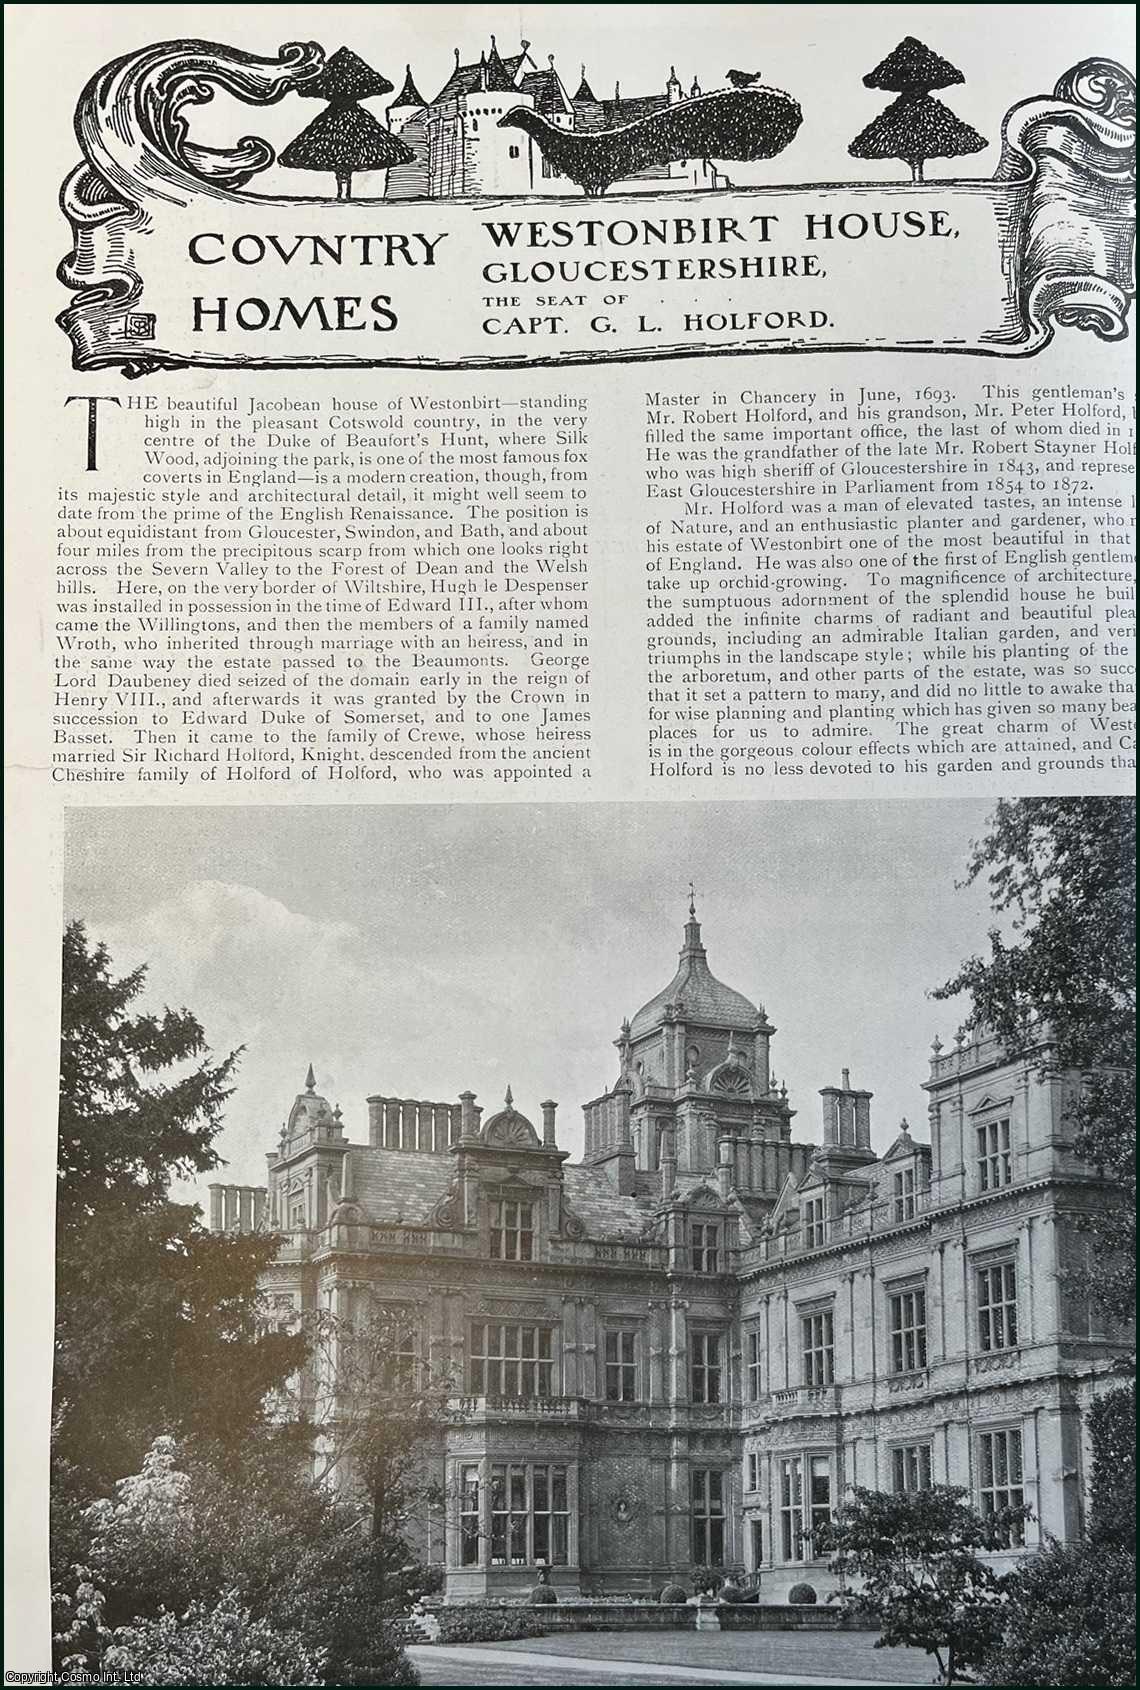 John MacGregor - Westonbirt House, Gloucestershire. The Seat of Captain G.L. Holford. Several pictures and accompanying text, removed from an original issue of Country Life Magazine, 1905.